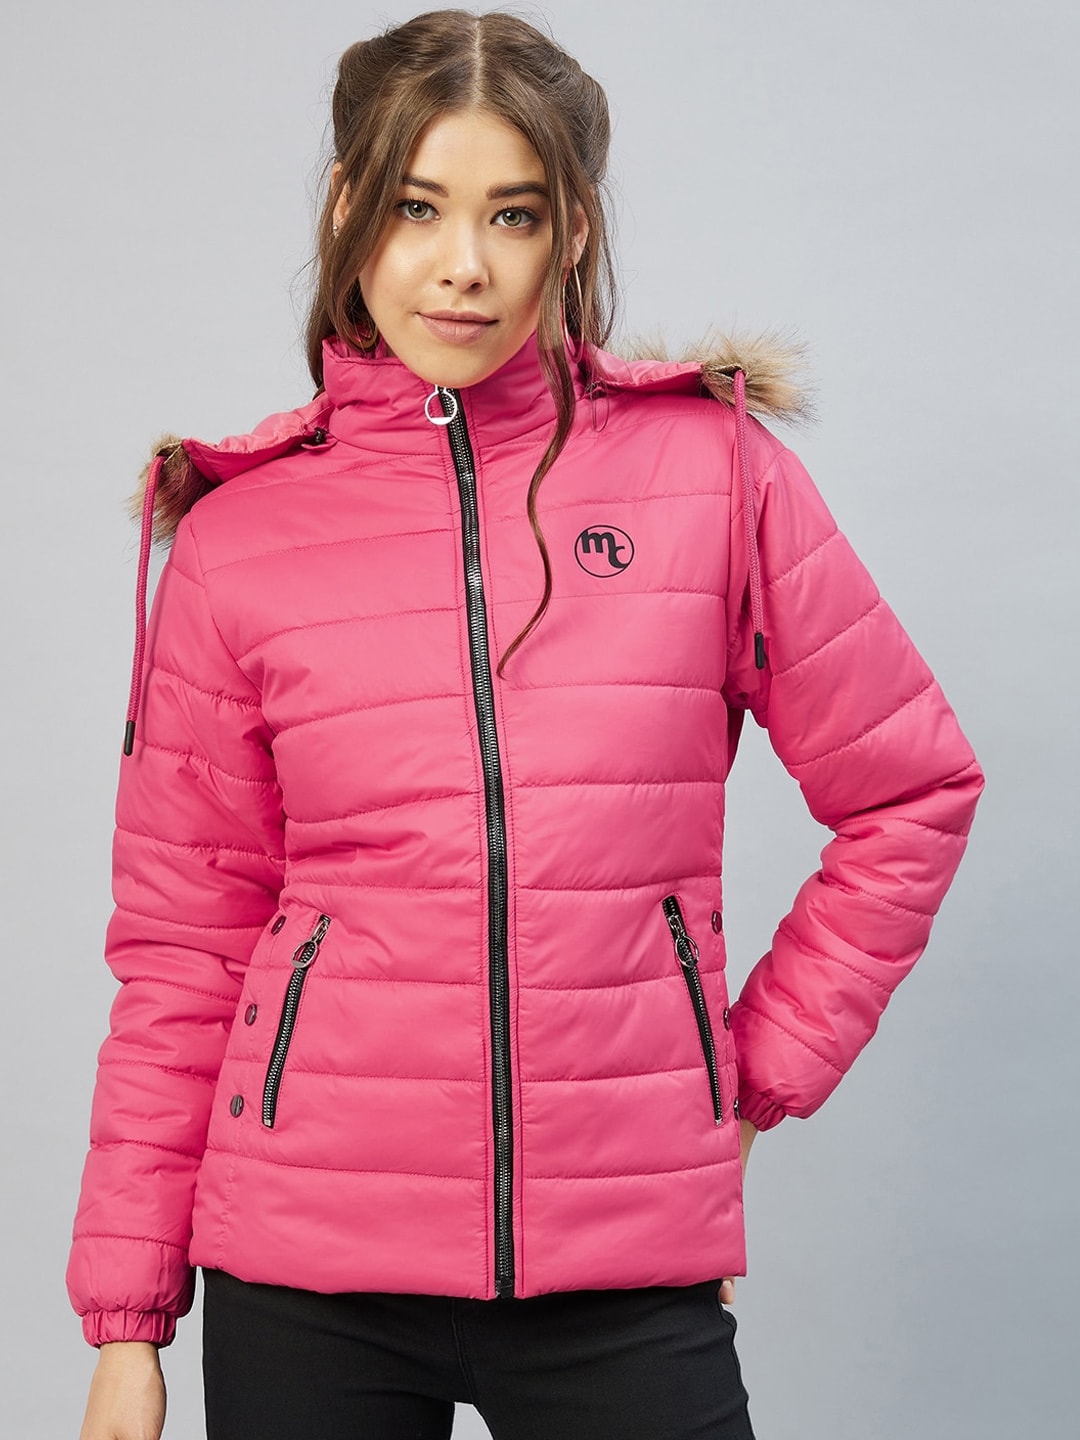 Marie Claire Women Pink Puffer Jacket Price in India